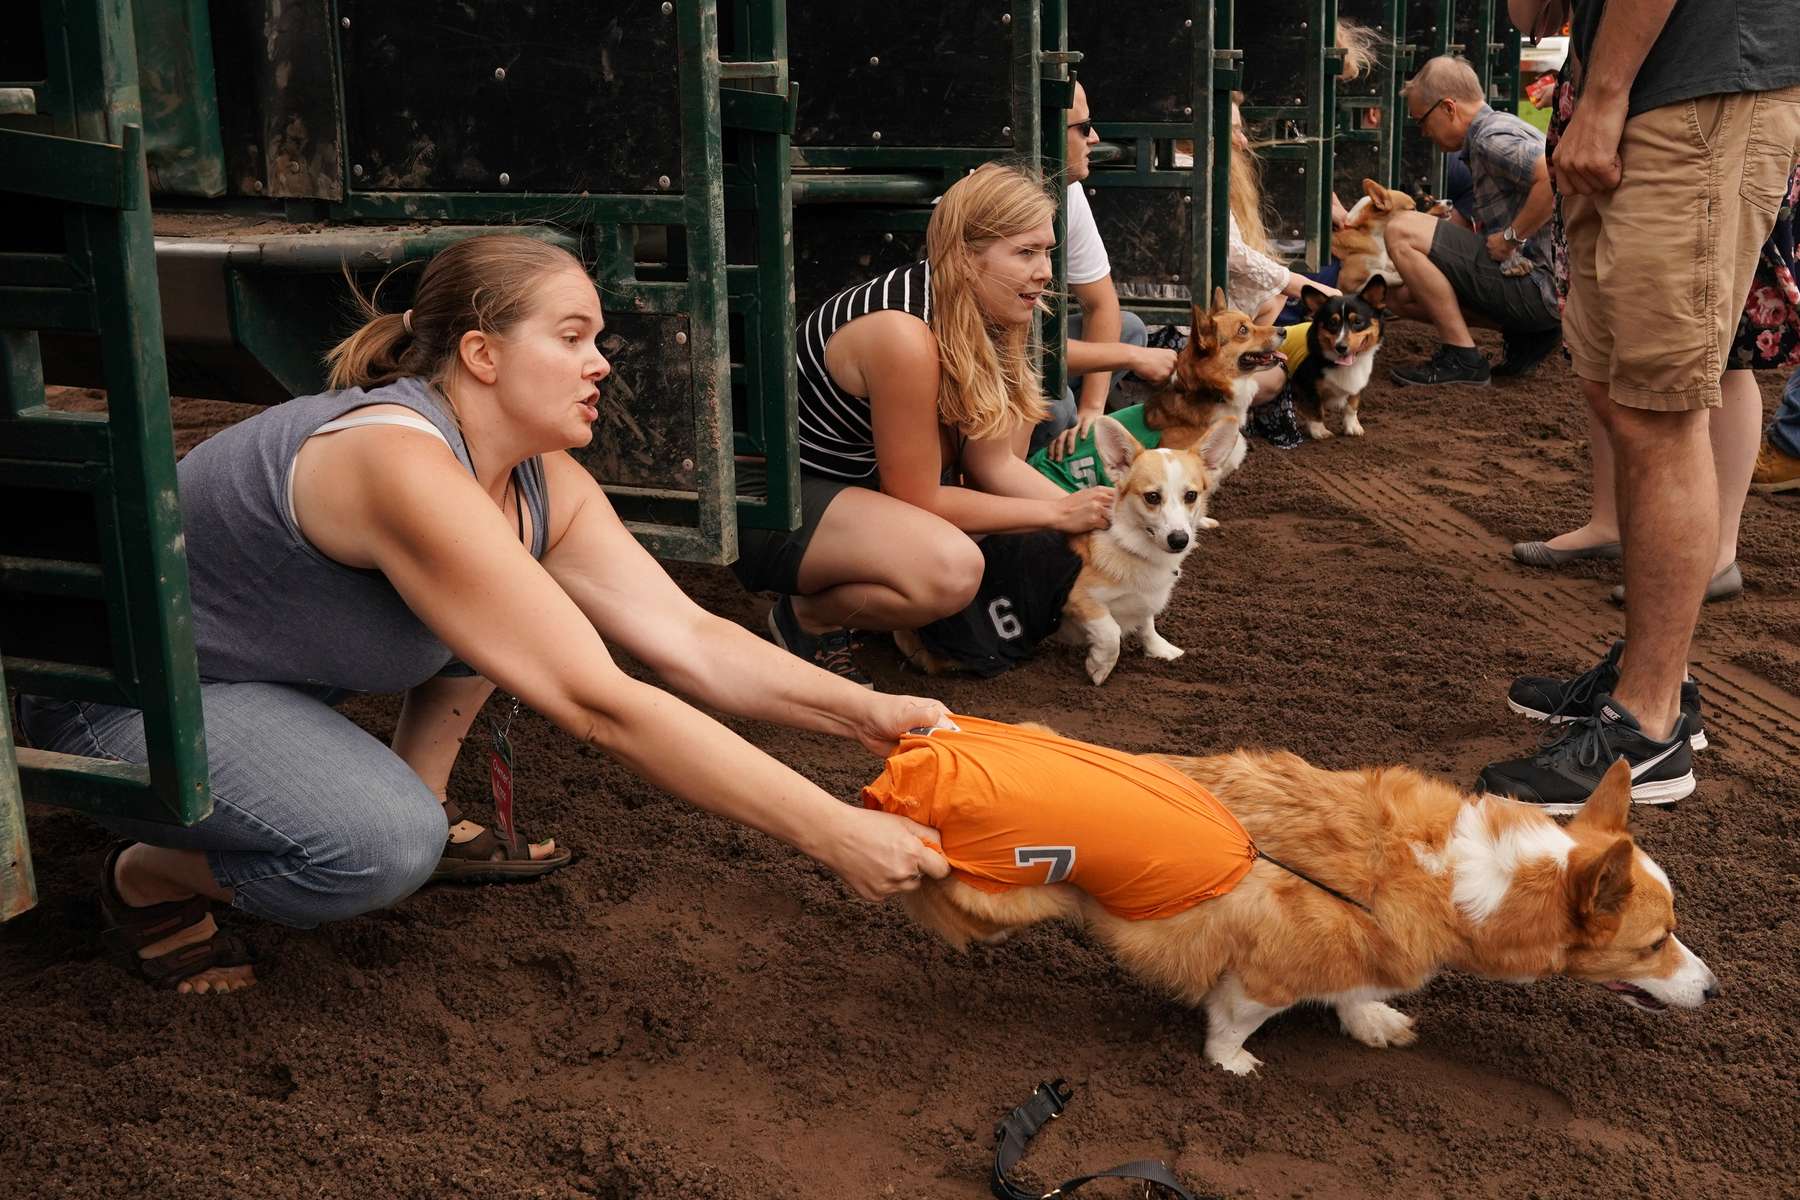 Rachel Geiser grabbed ahold of her dog Link's silks as he broke early from the starting gate as the other dogs were being loaded prior to the Corgi Dog Races Championship during the Bark in the Park dog races at Canterbury Park in Shakopee, Minn. Link went on to win the race.